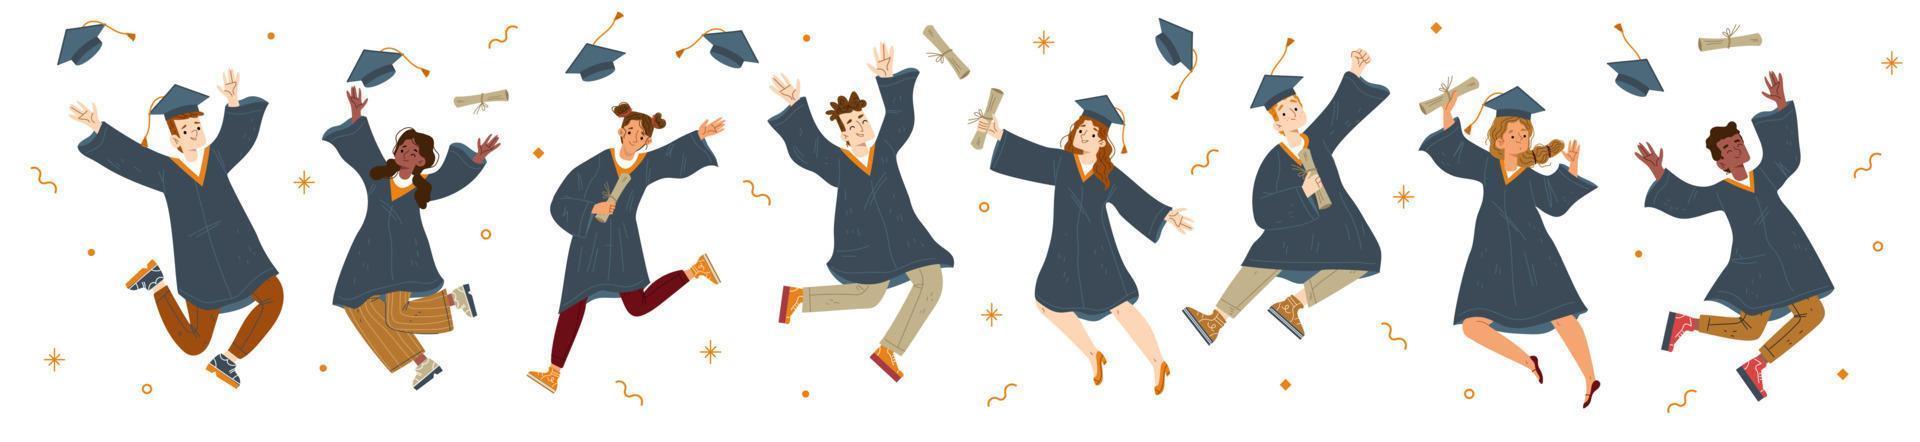 Student graduate jump, characters in gown and cap vector